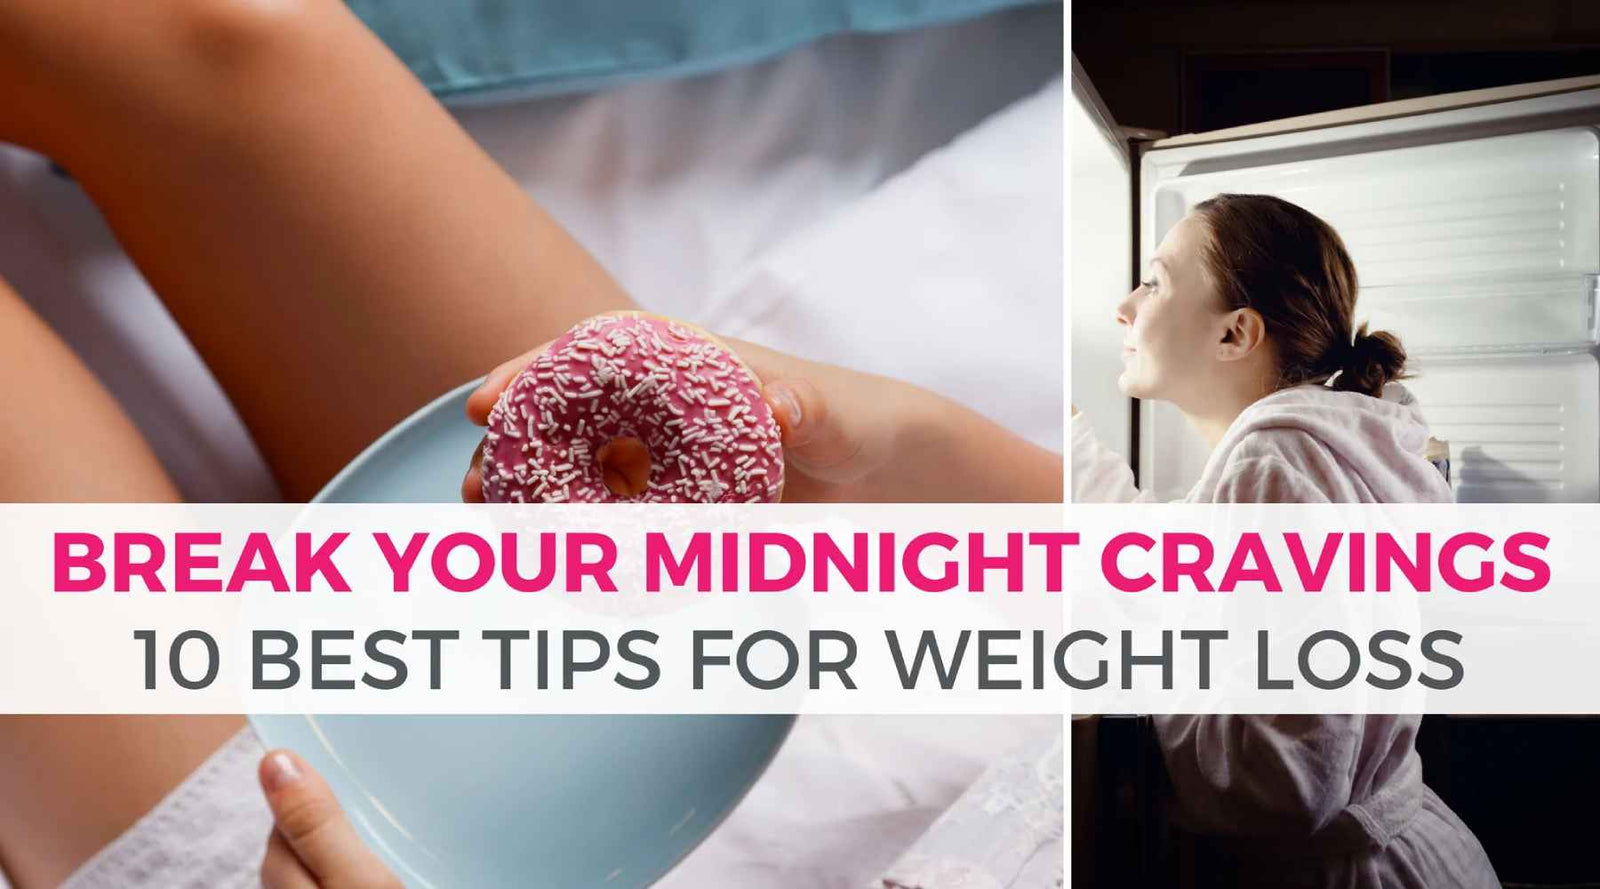 How to Win Against Your Late-Night Cravings